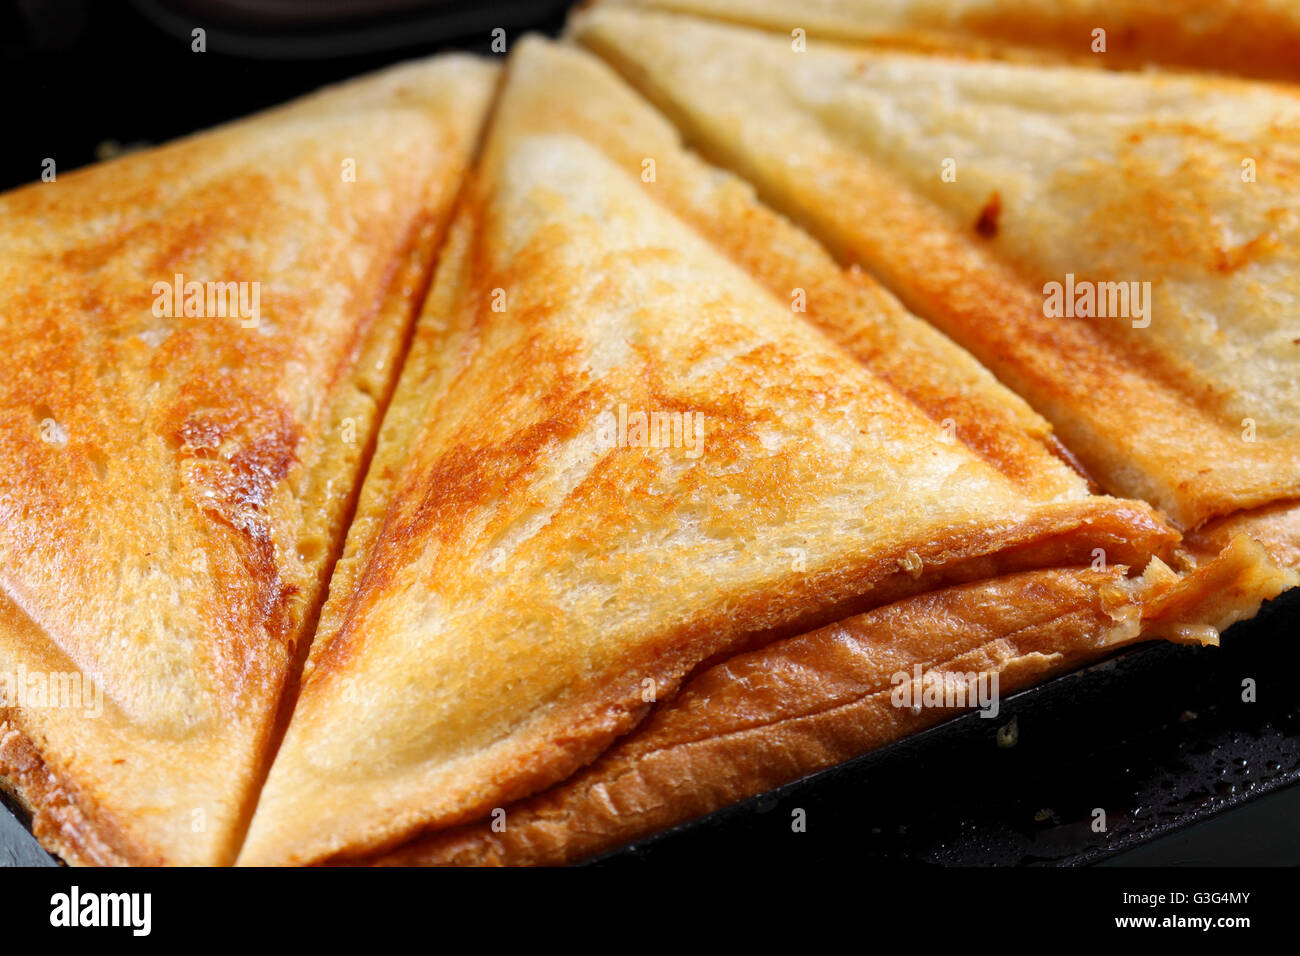 Toasted Sandwich Maker High Resolution Stock Photography and Images - Alamy